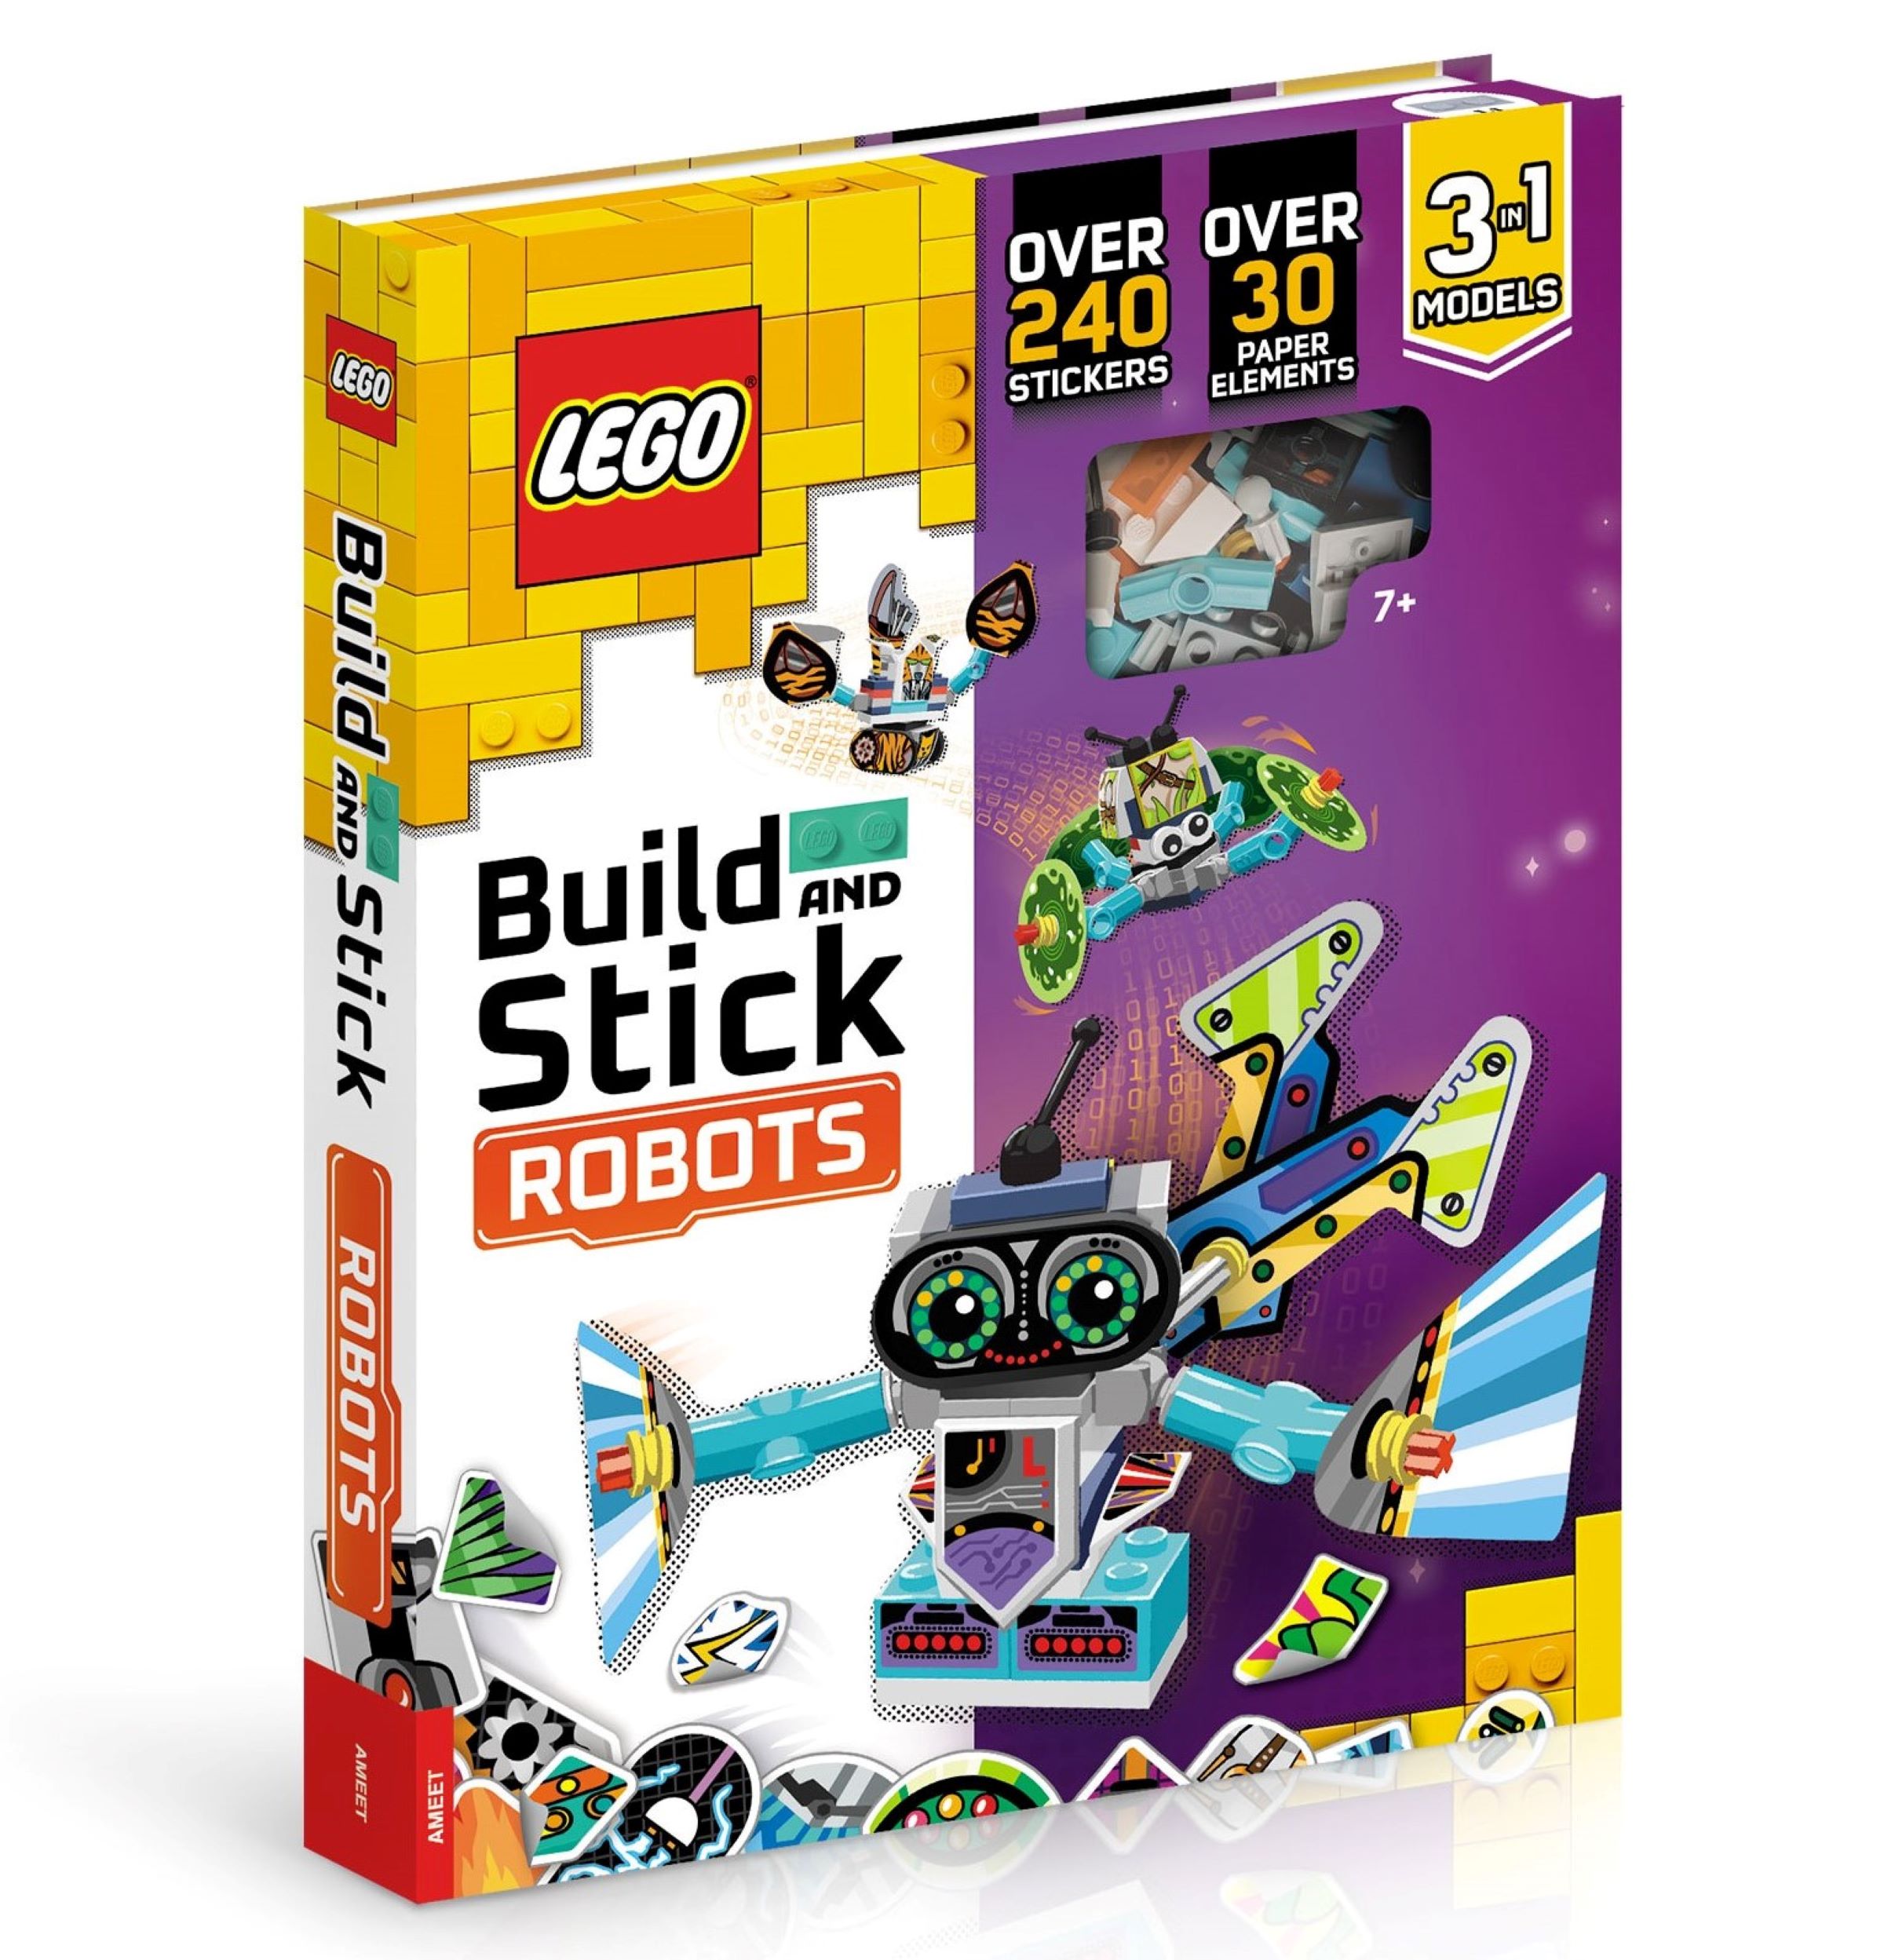 Build and Stick: Robots 5007895, Other